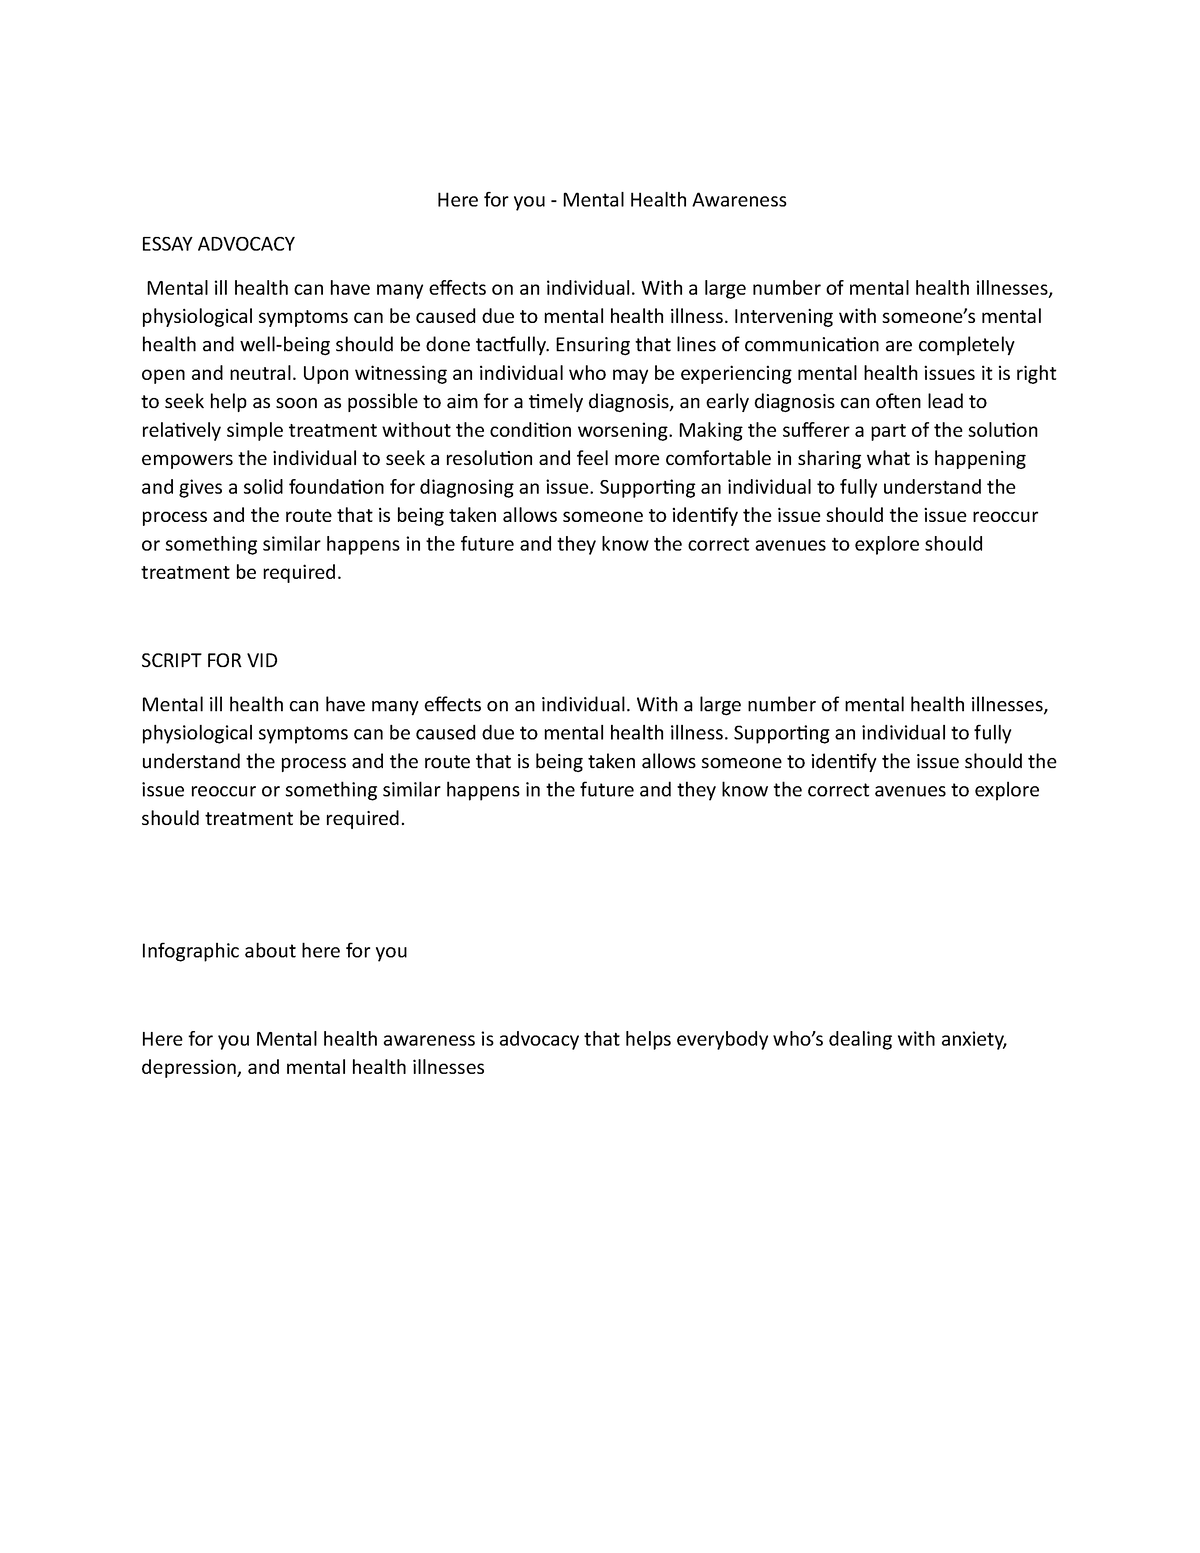 advocacy about mental health awareness essay